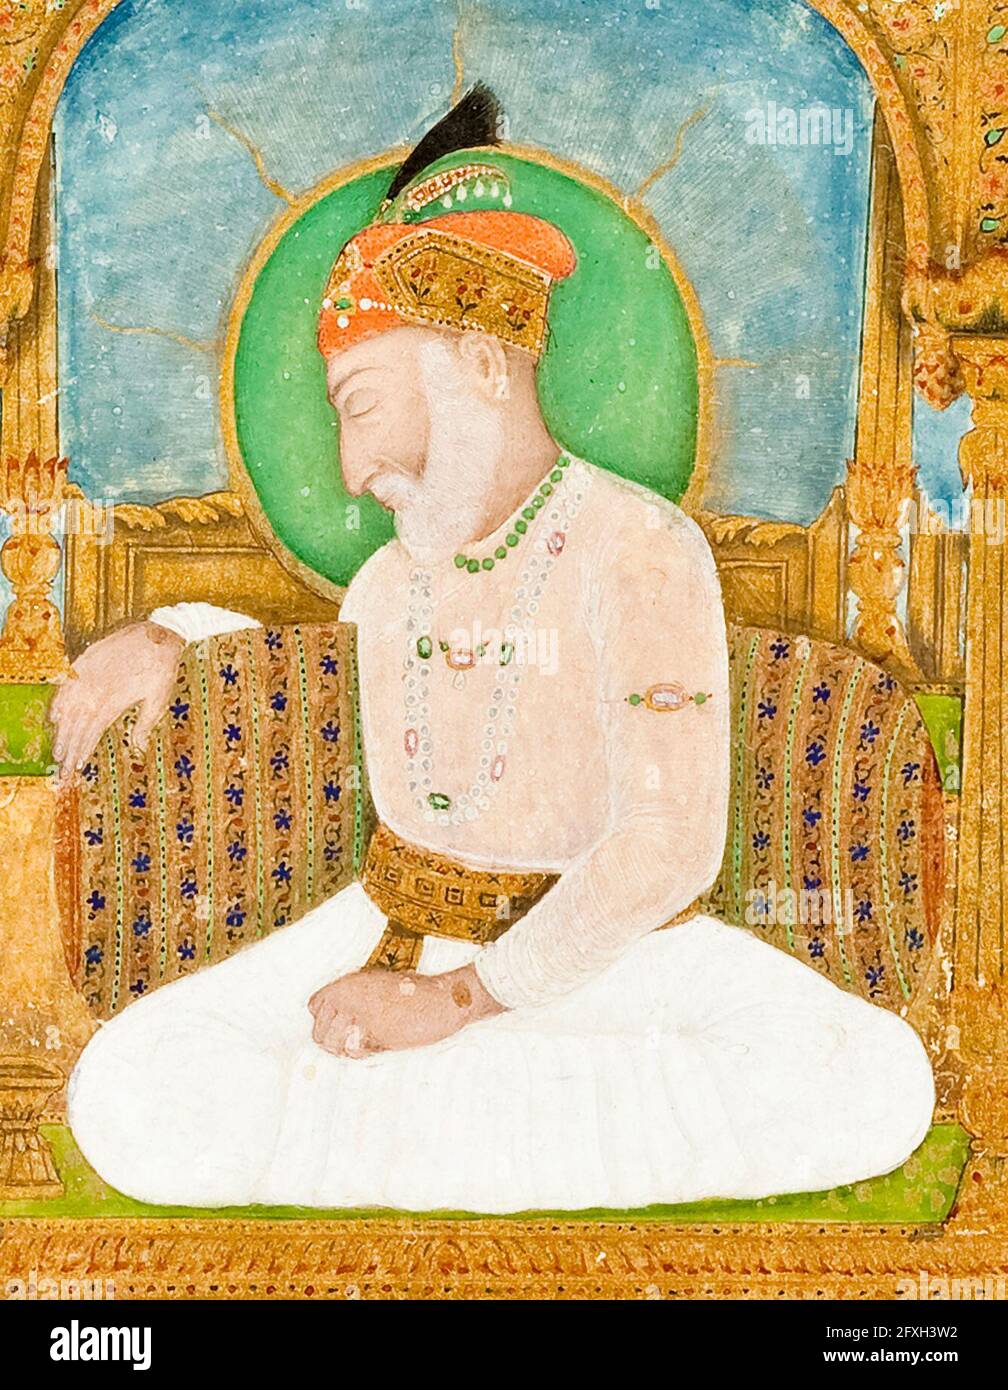 Mughal Emperor Painting High Resolution Stock Photography and Images